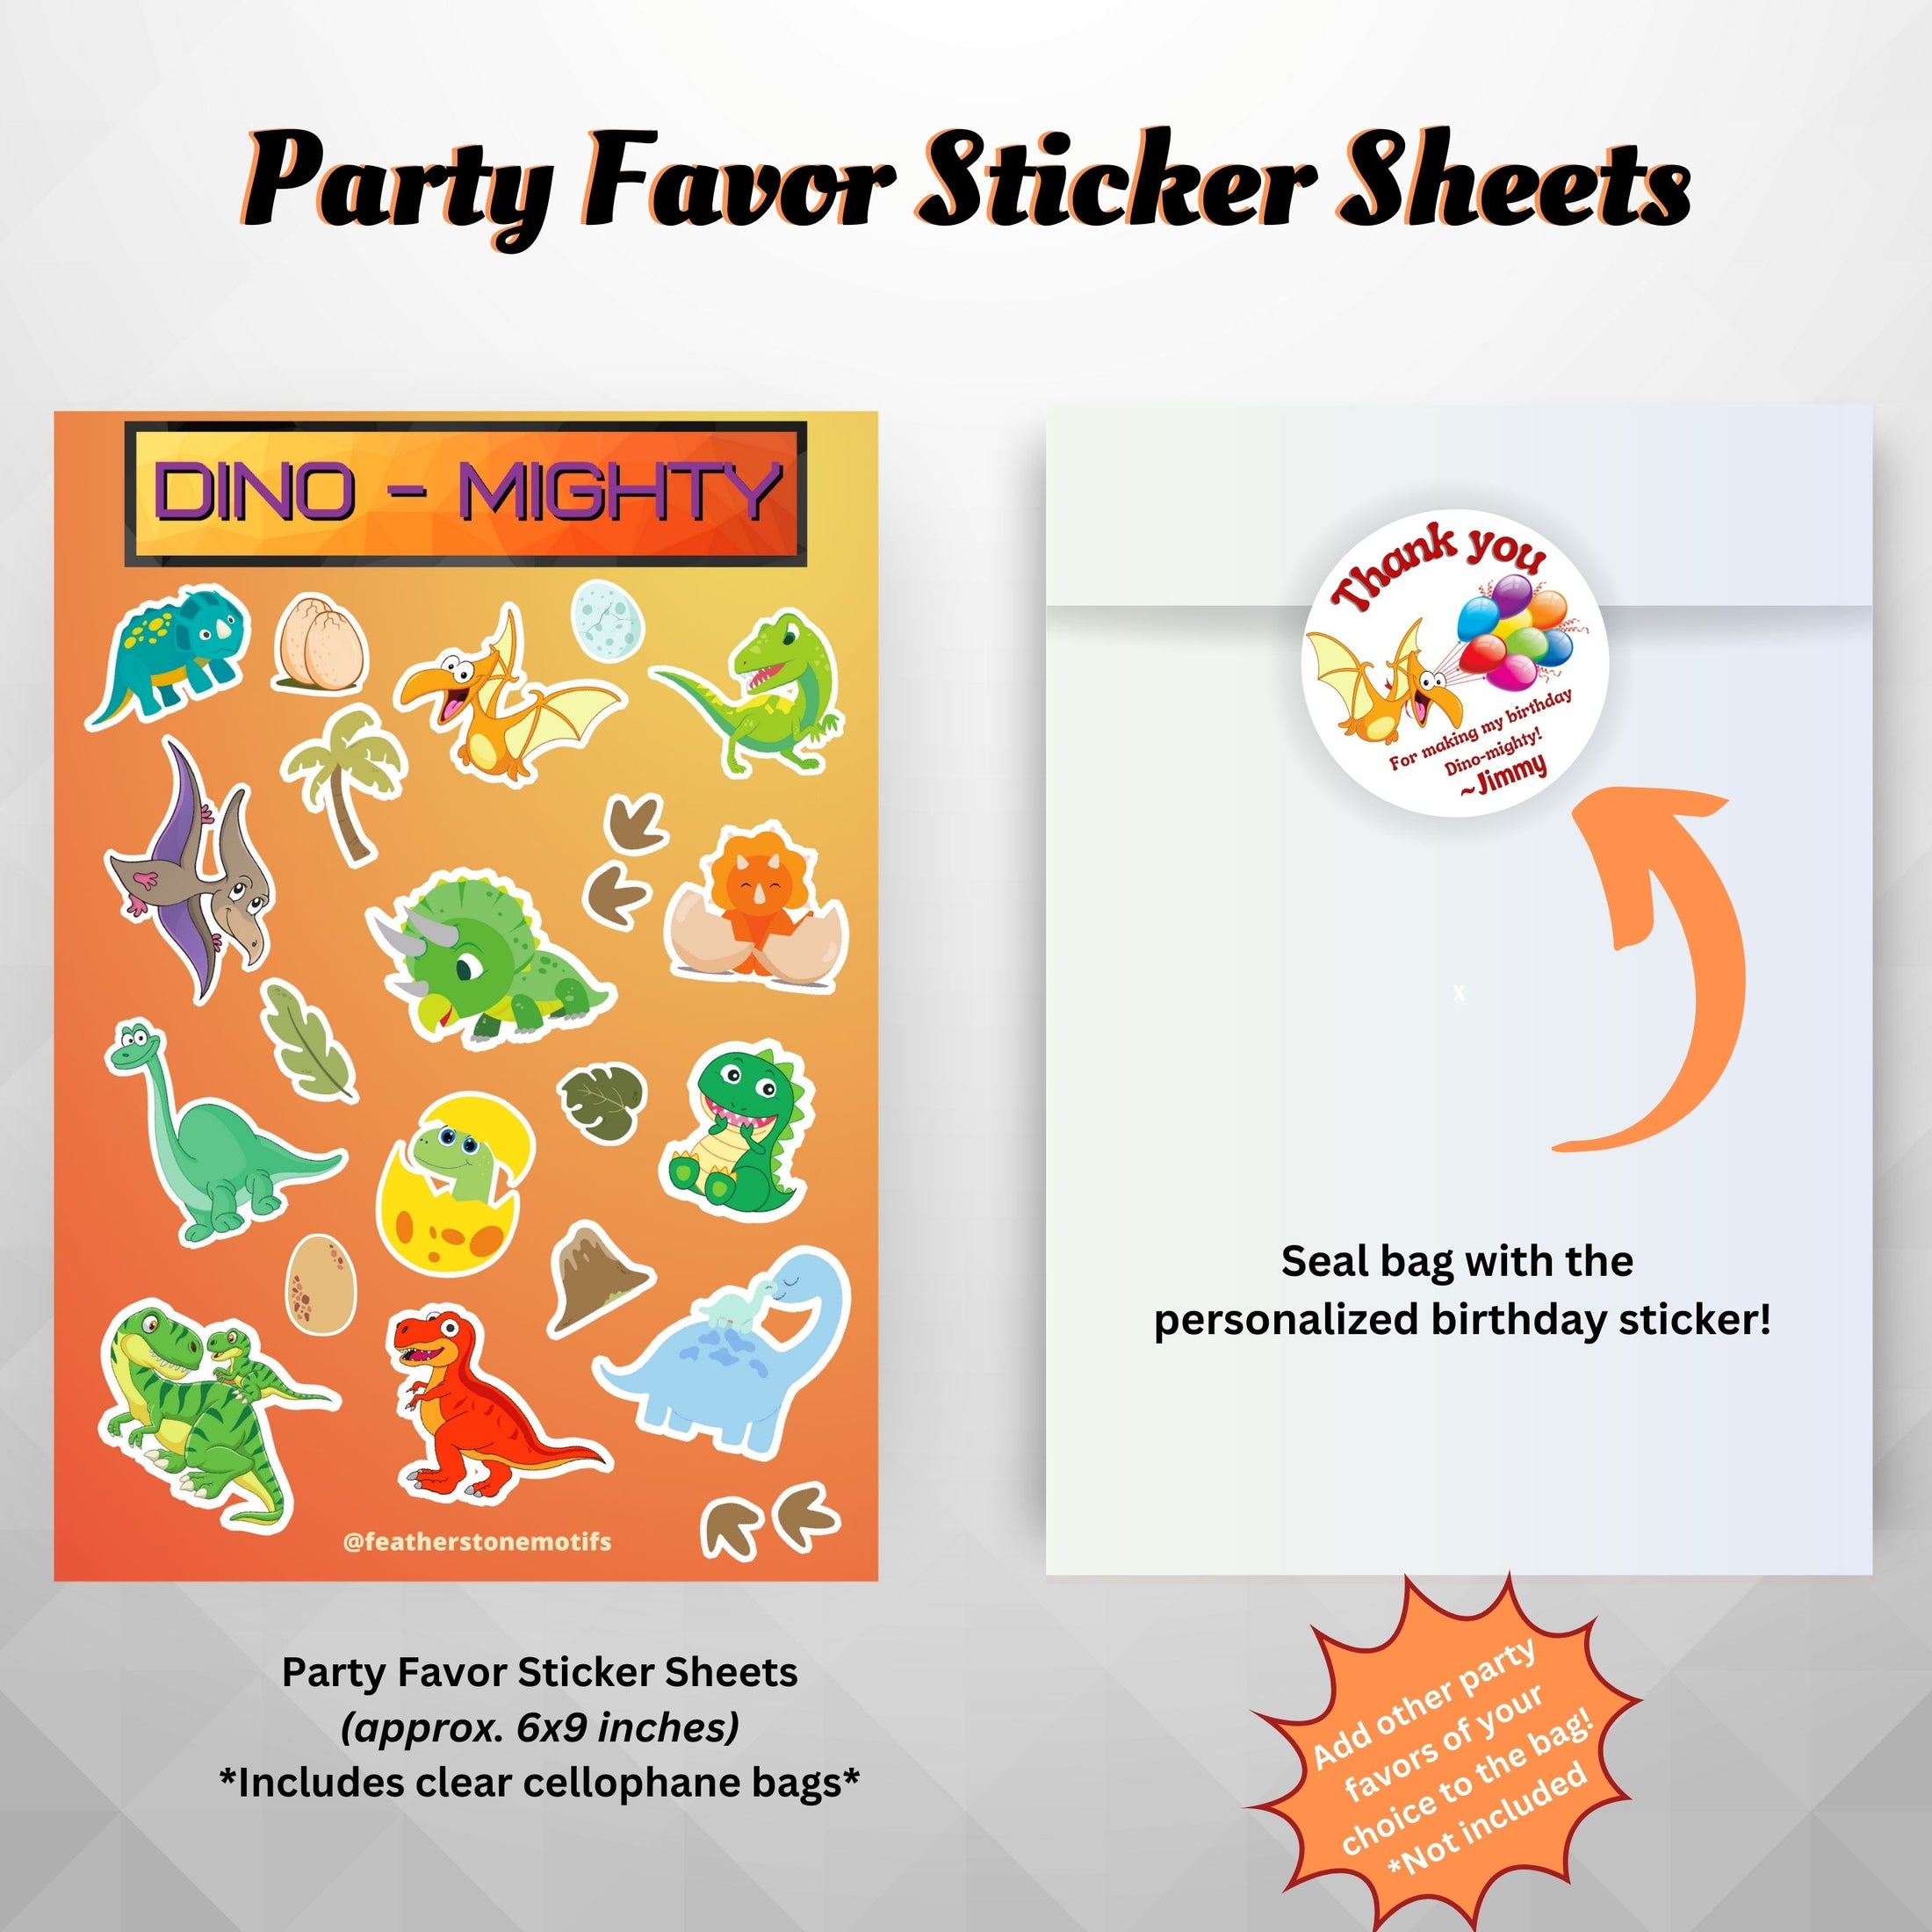 This image shows the dino-mighty sticker sheet included as a party favor, the cellophane bag, and the personalized paper thank you sticker.